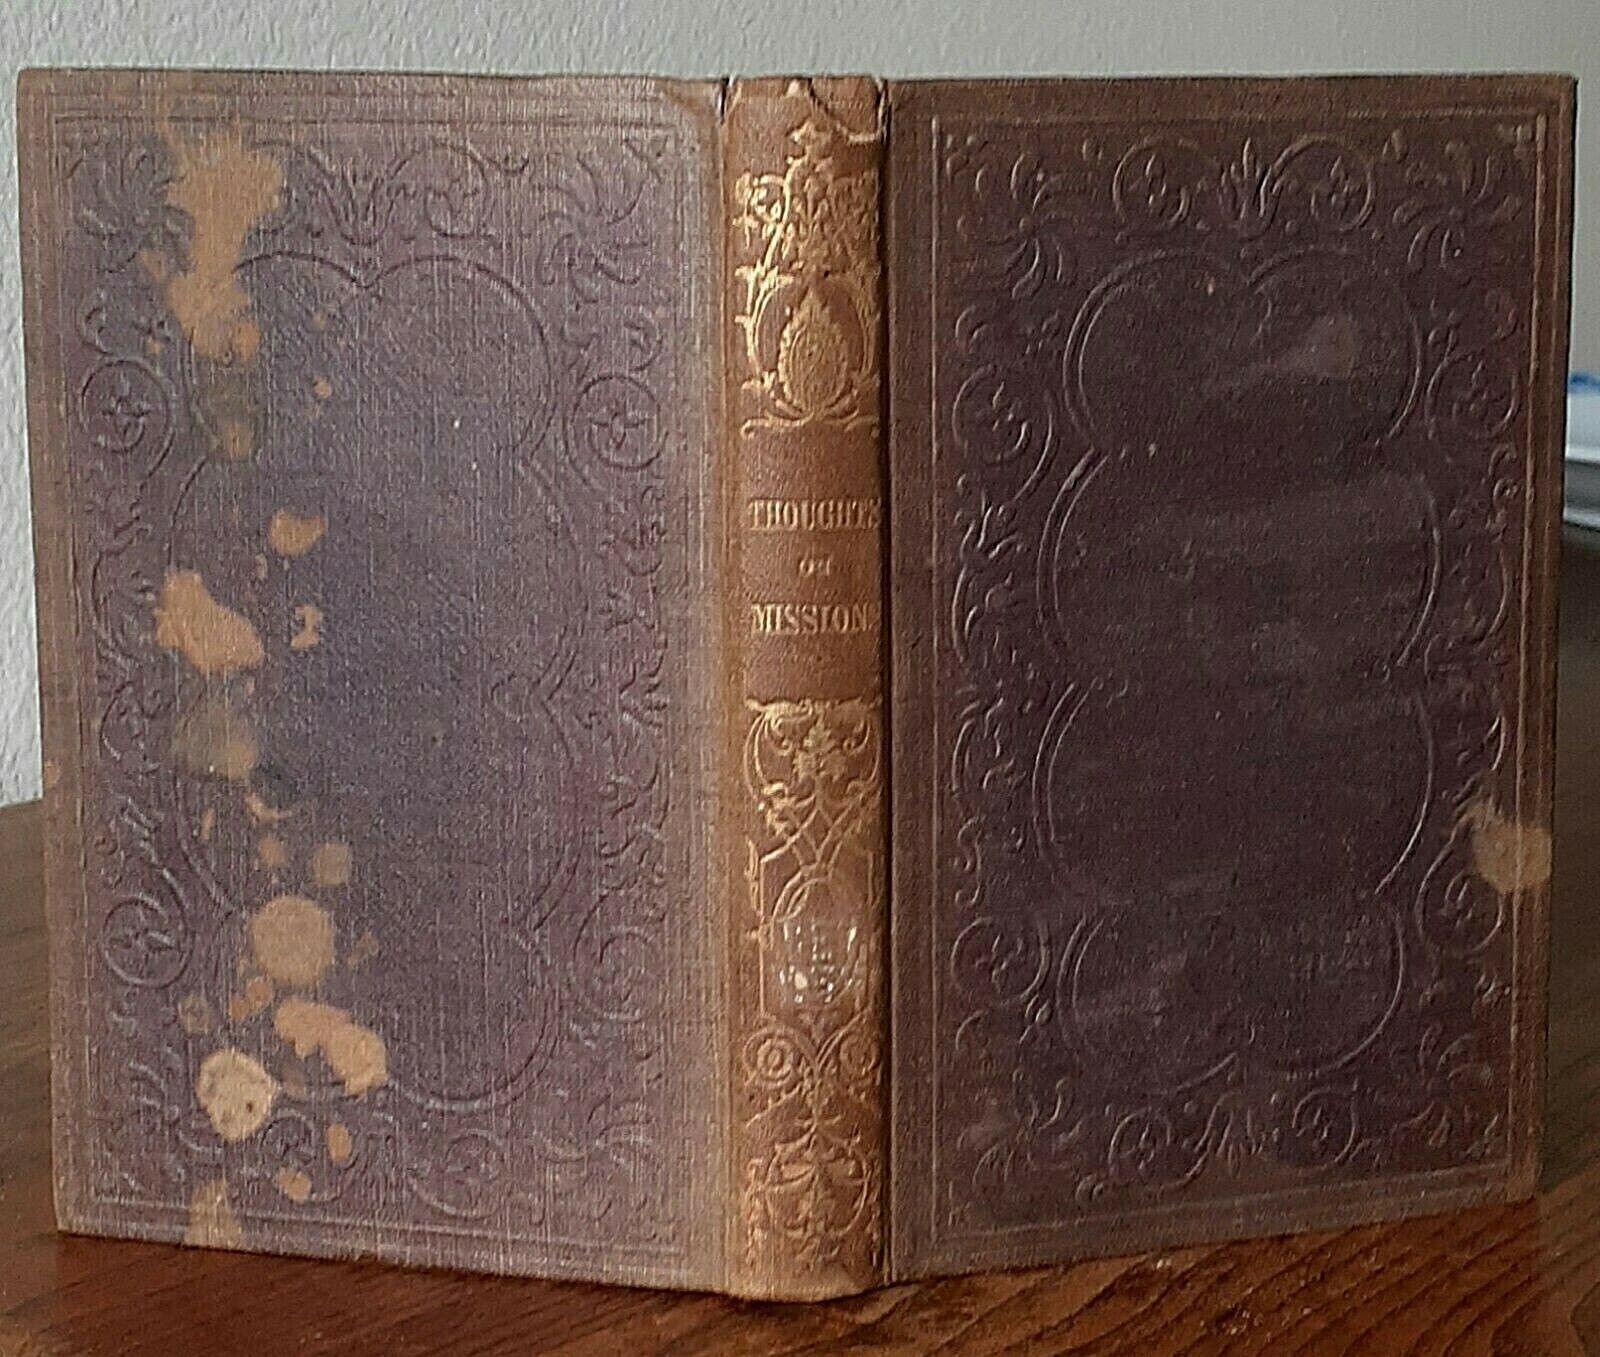 RARE 1845 1st Edn~SHELDON DIBBLE's Thoughts on Missions~Sandwich Islands~HAWAII